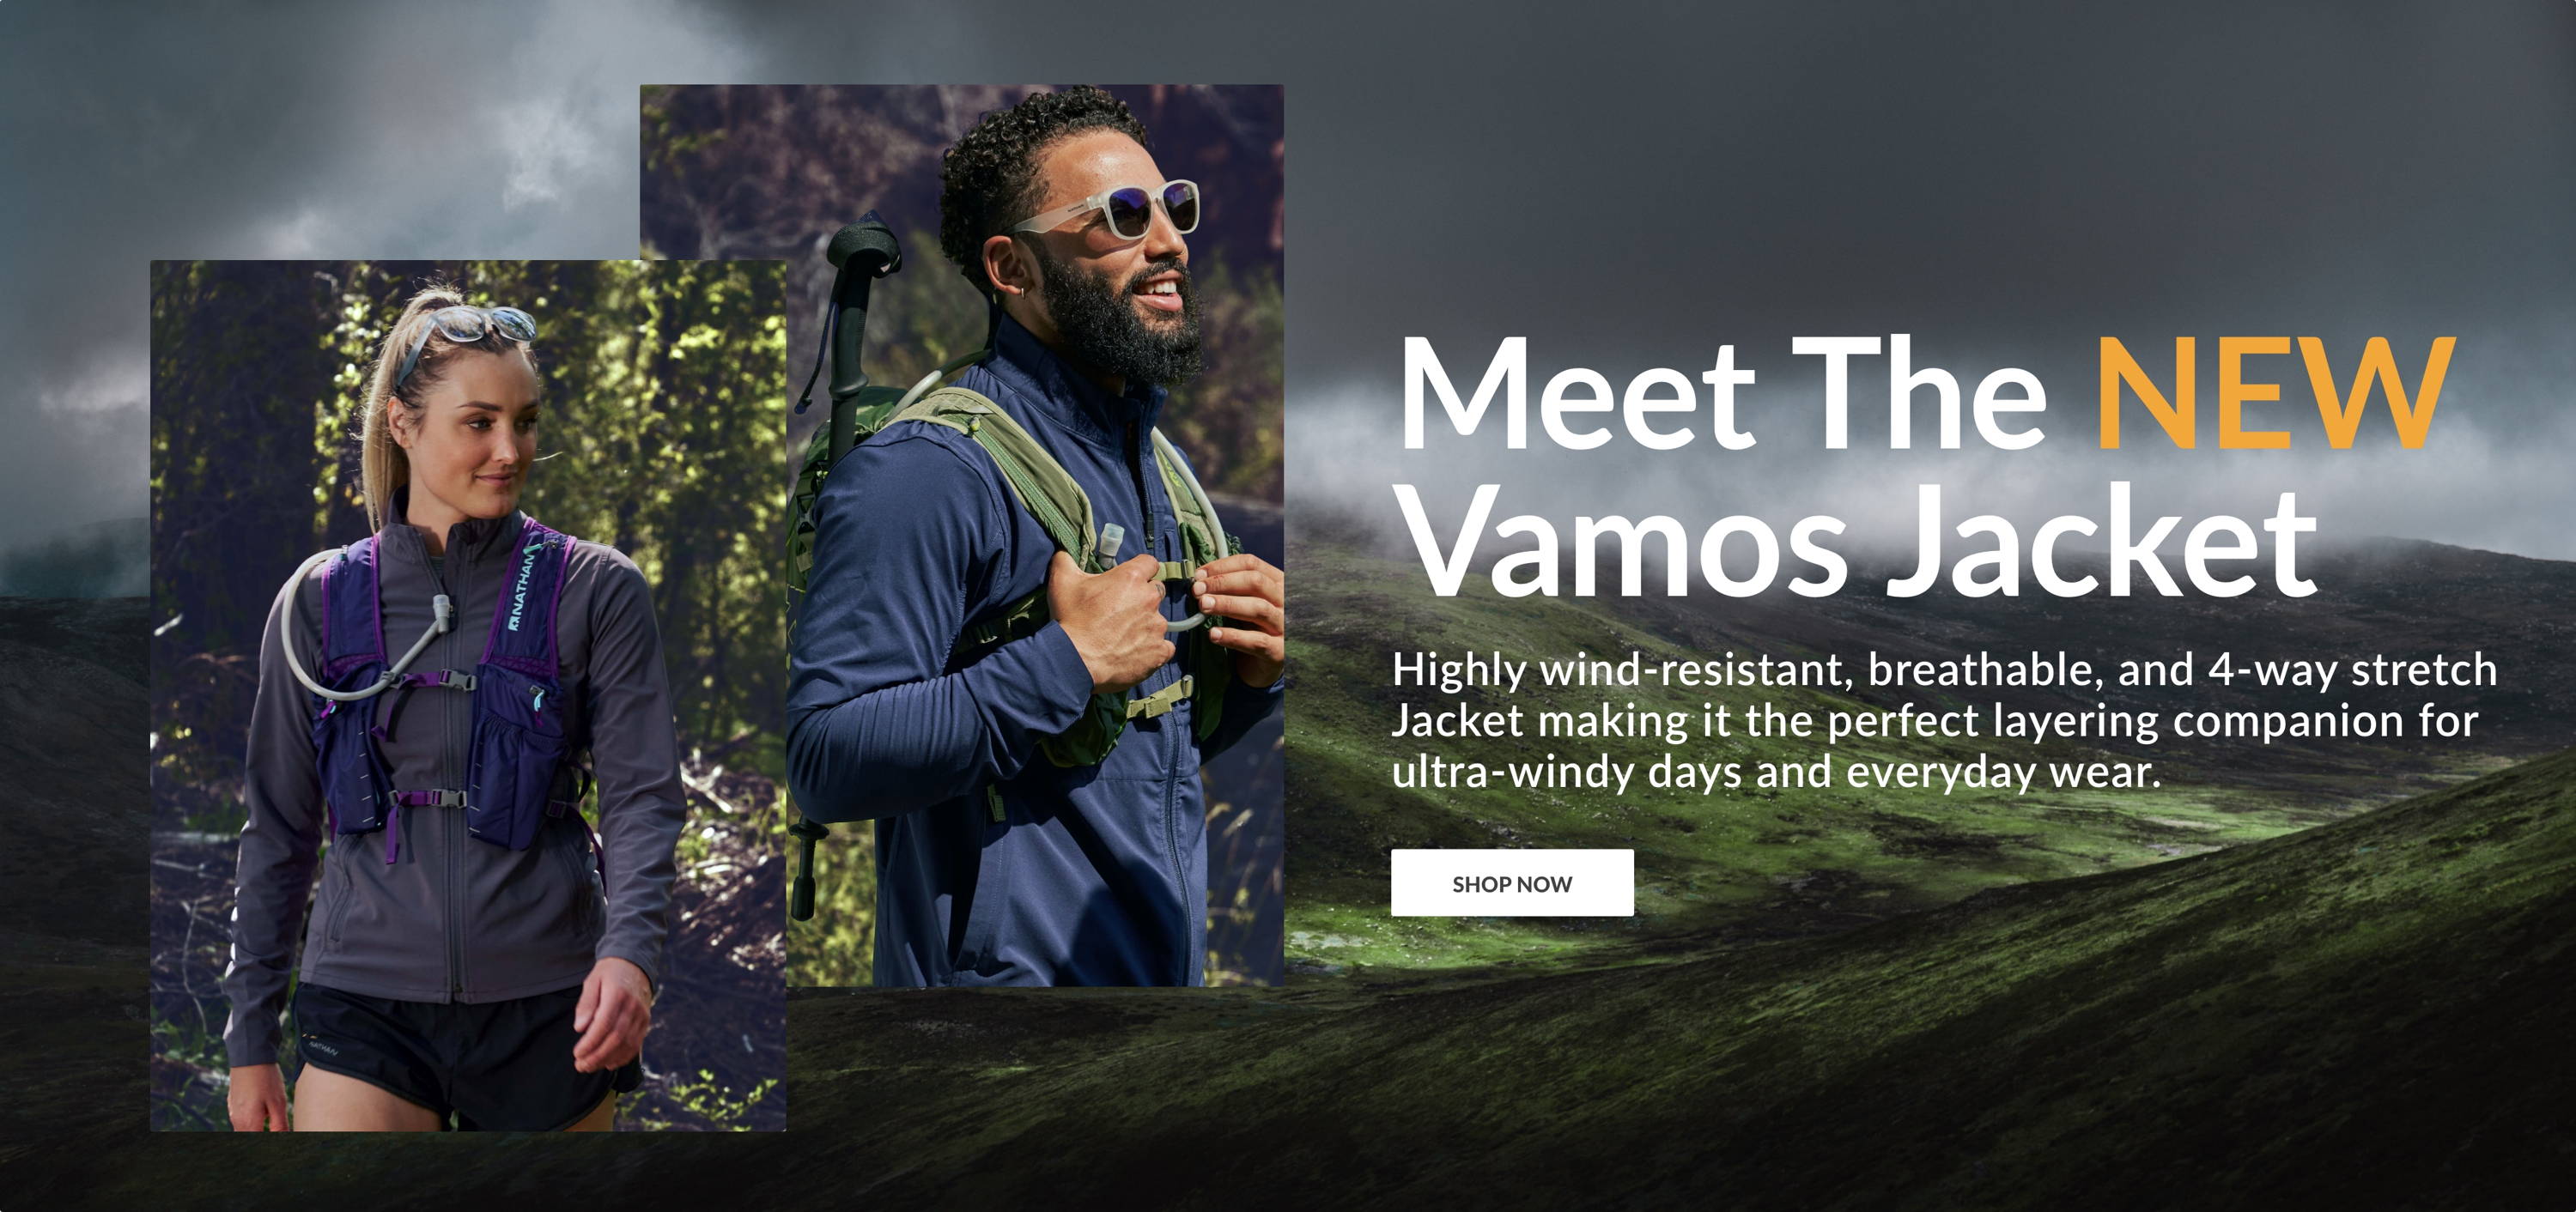 Meet the new Vamos Jacket. Highly wind-resistant, breathable, and 4-way stretch jacket making it the perfect layering companion for ultra-windy days and everyday wear. SHOP NOW